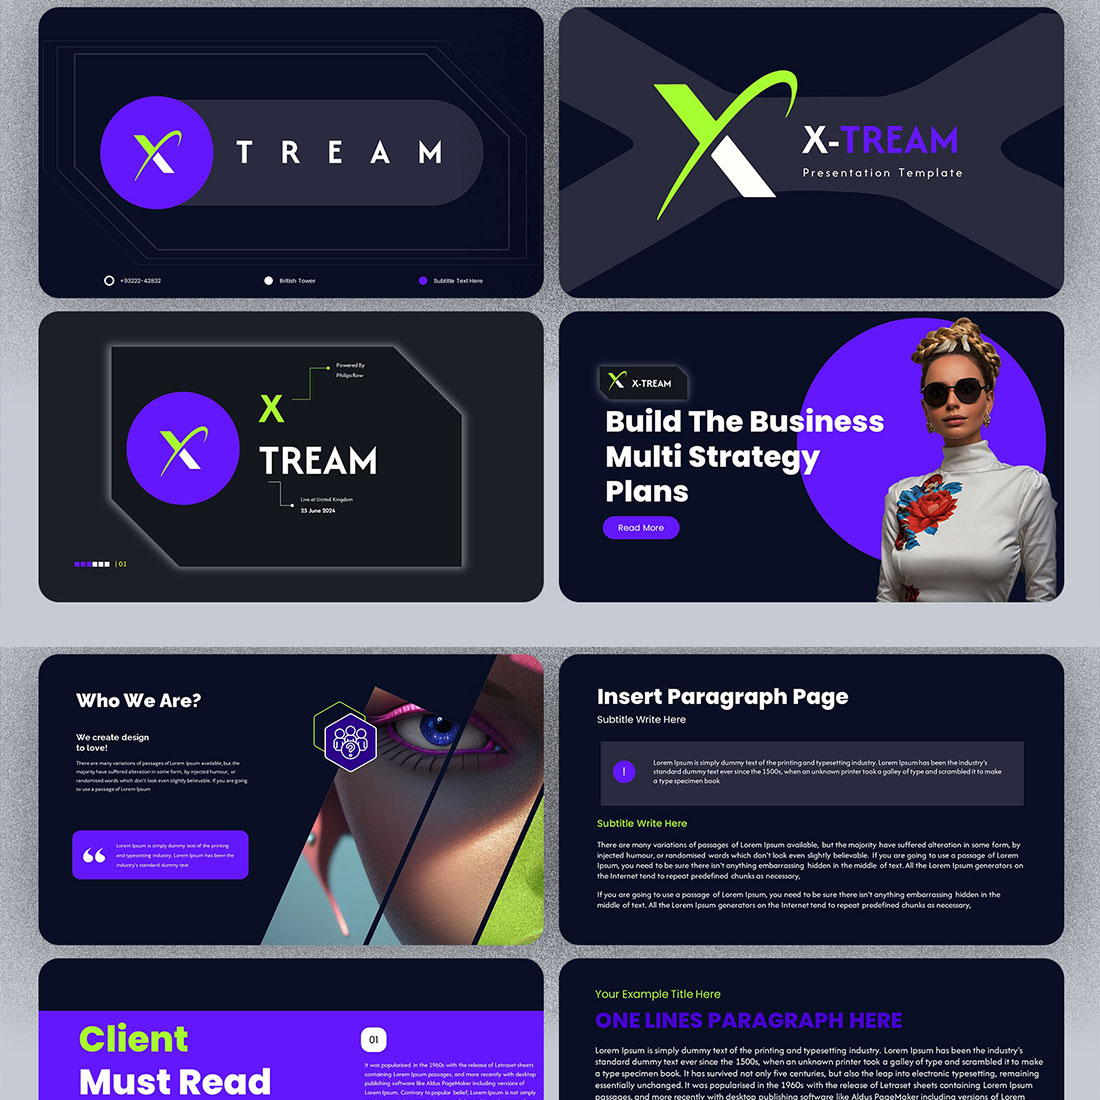 Xtream Business Plan PowerPoint Presentation Template preview image.